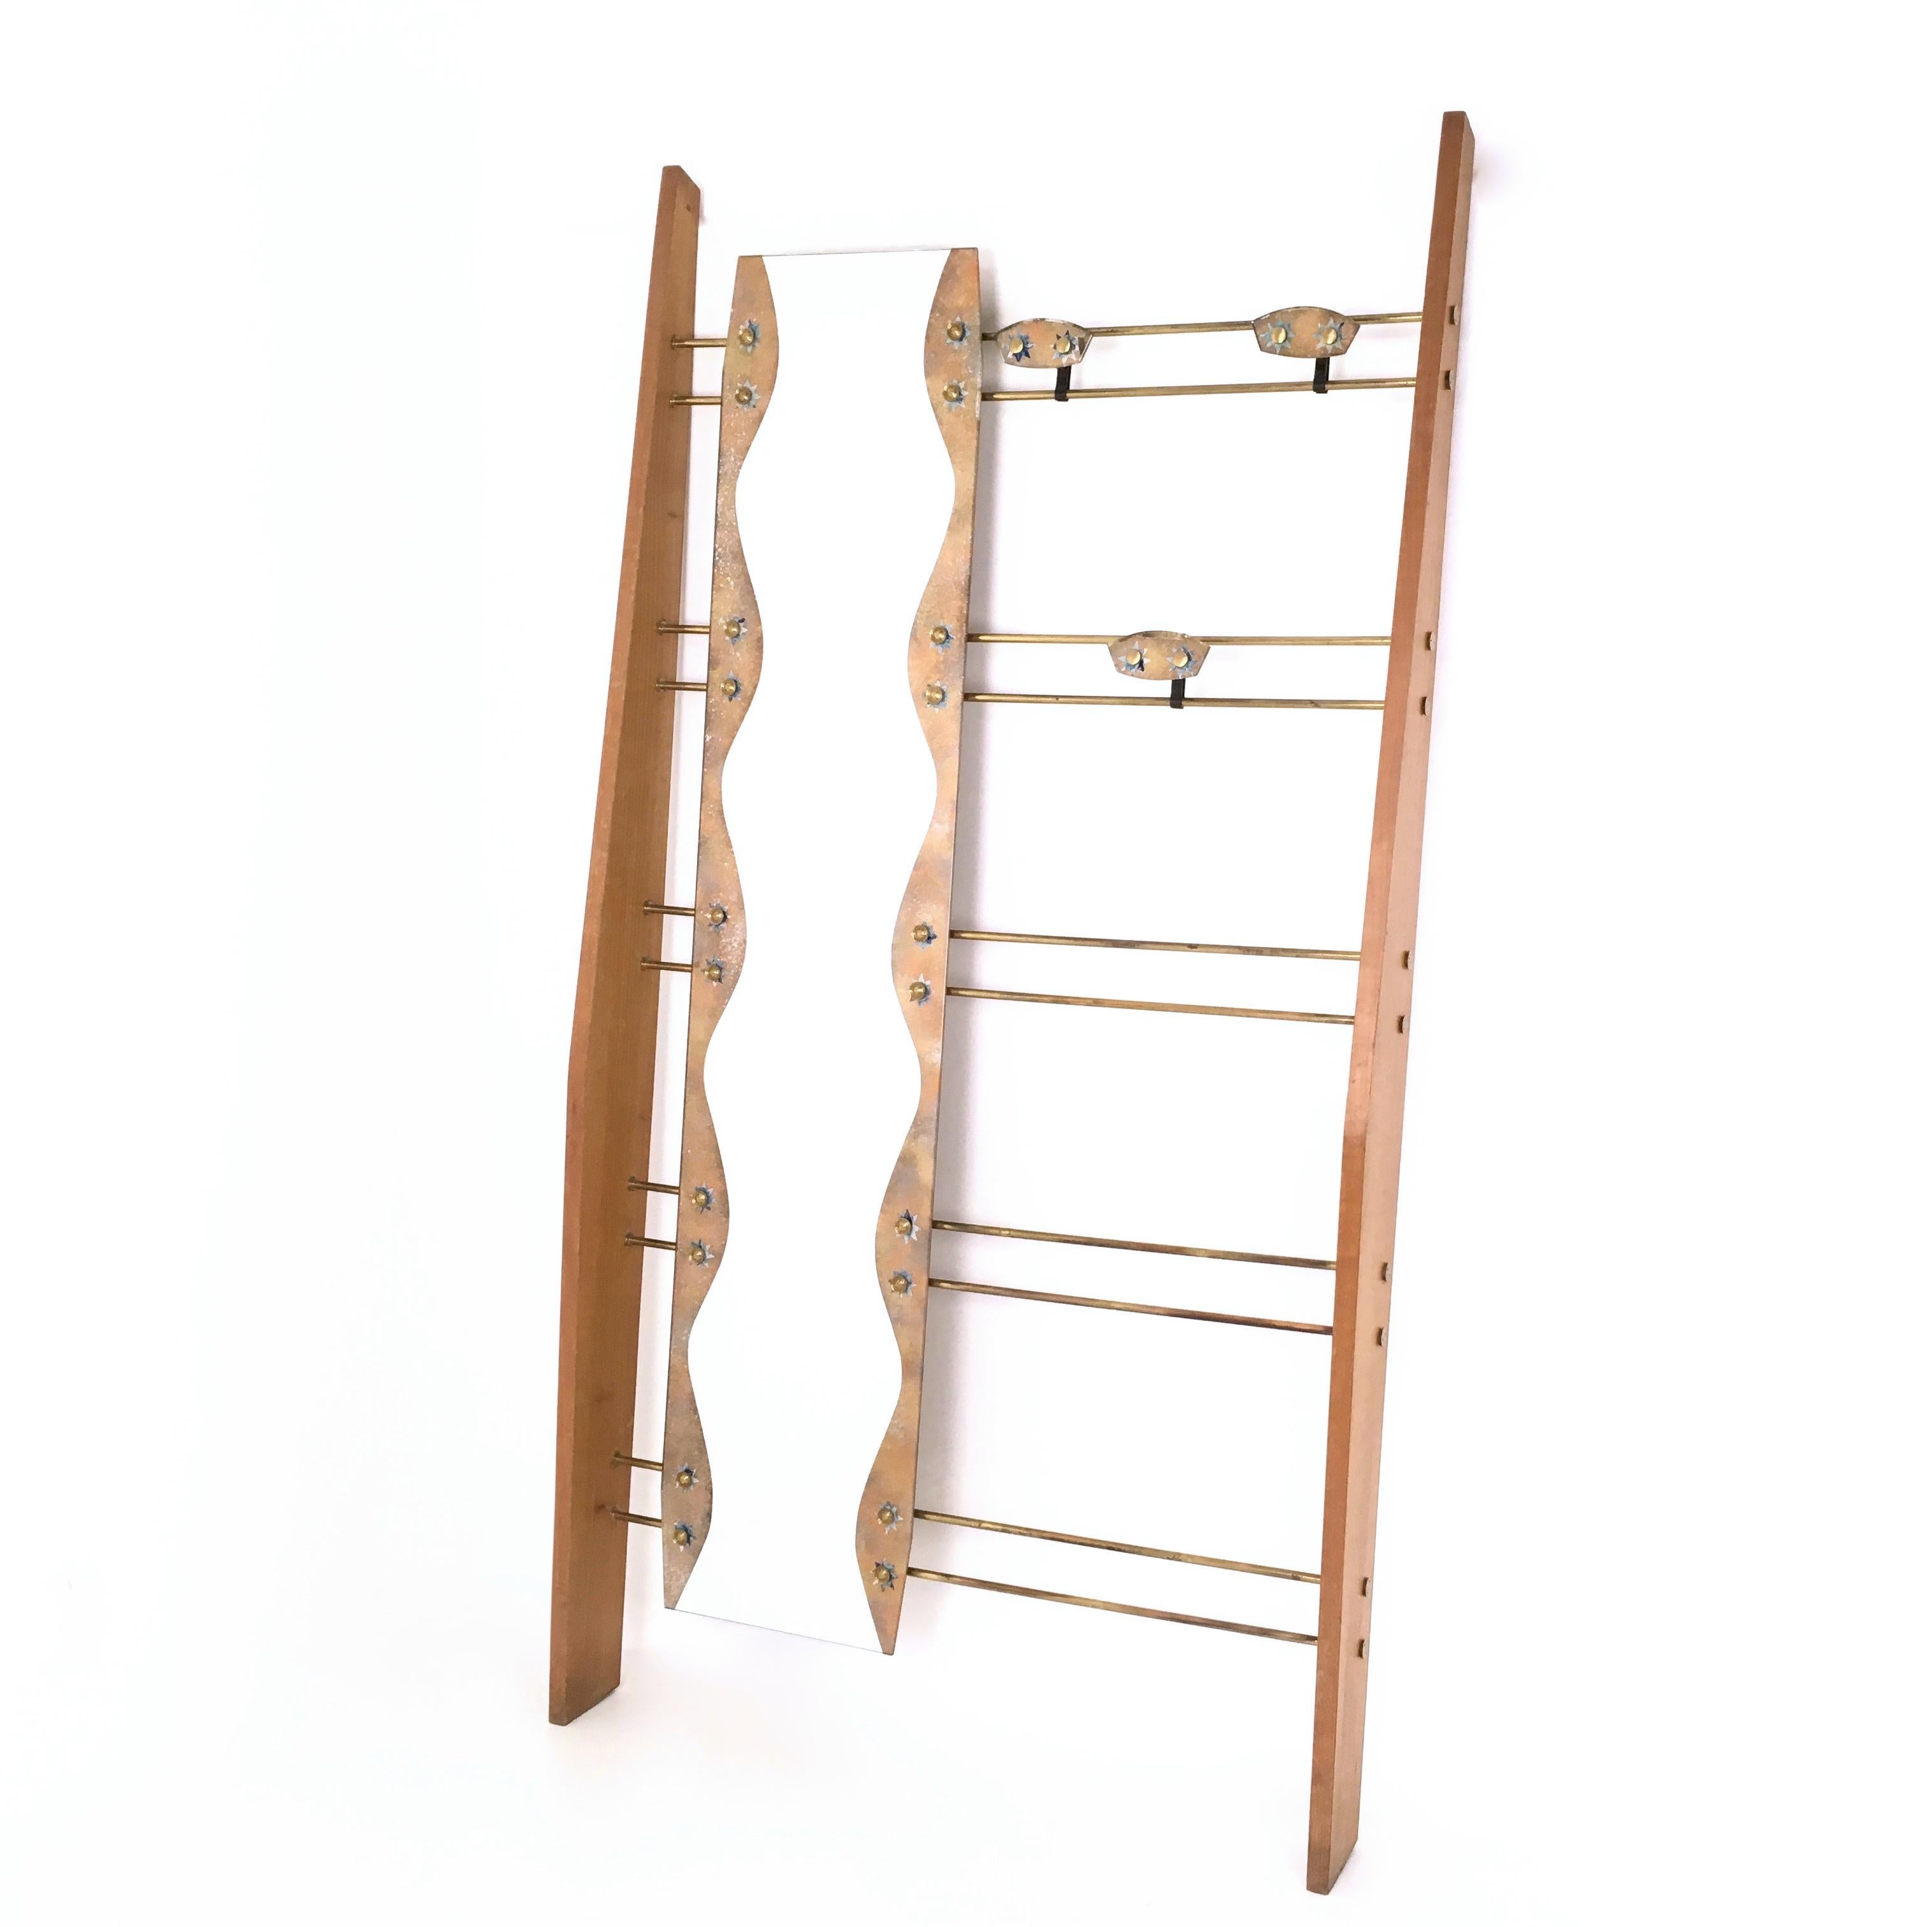 Made Italy, 1950s. 
This entryway coat rack is made in cherry veneer and features a brass frame, a mirror and painted brass and back-painted glass details.
It may show slight traces of use since it's vintage, but it can be considered as in good